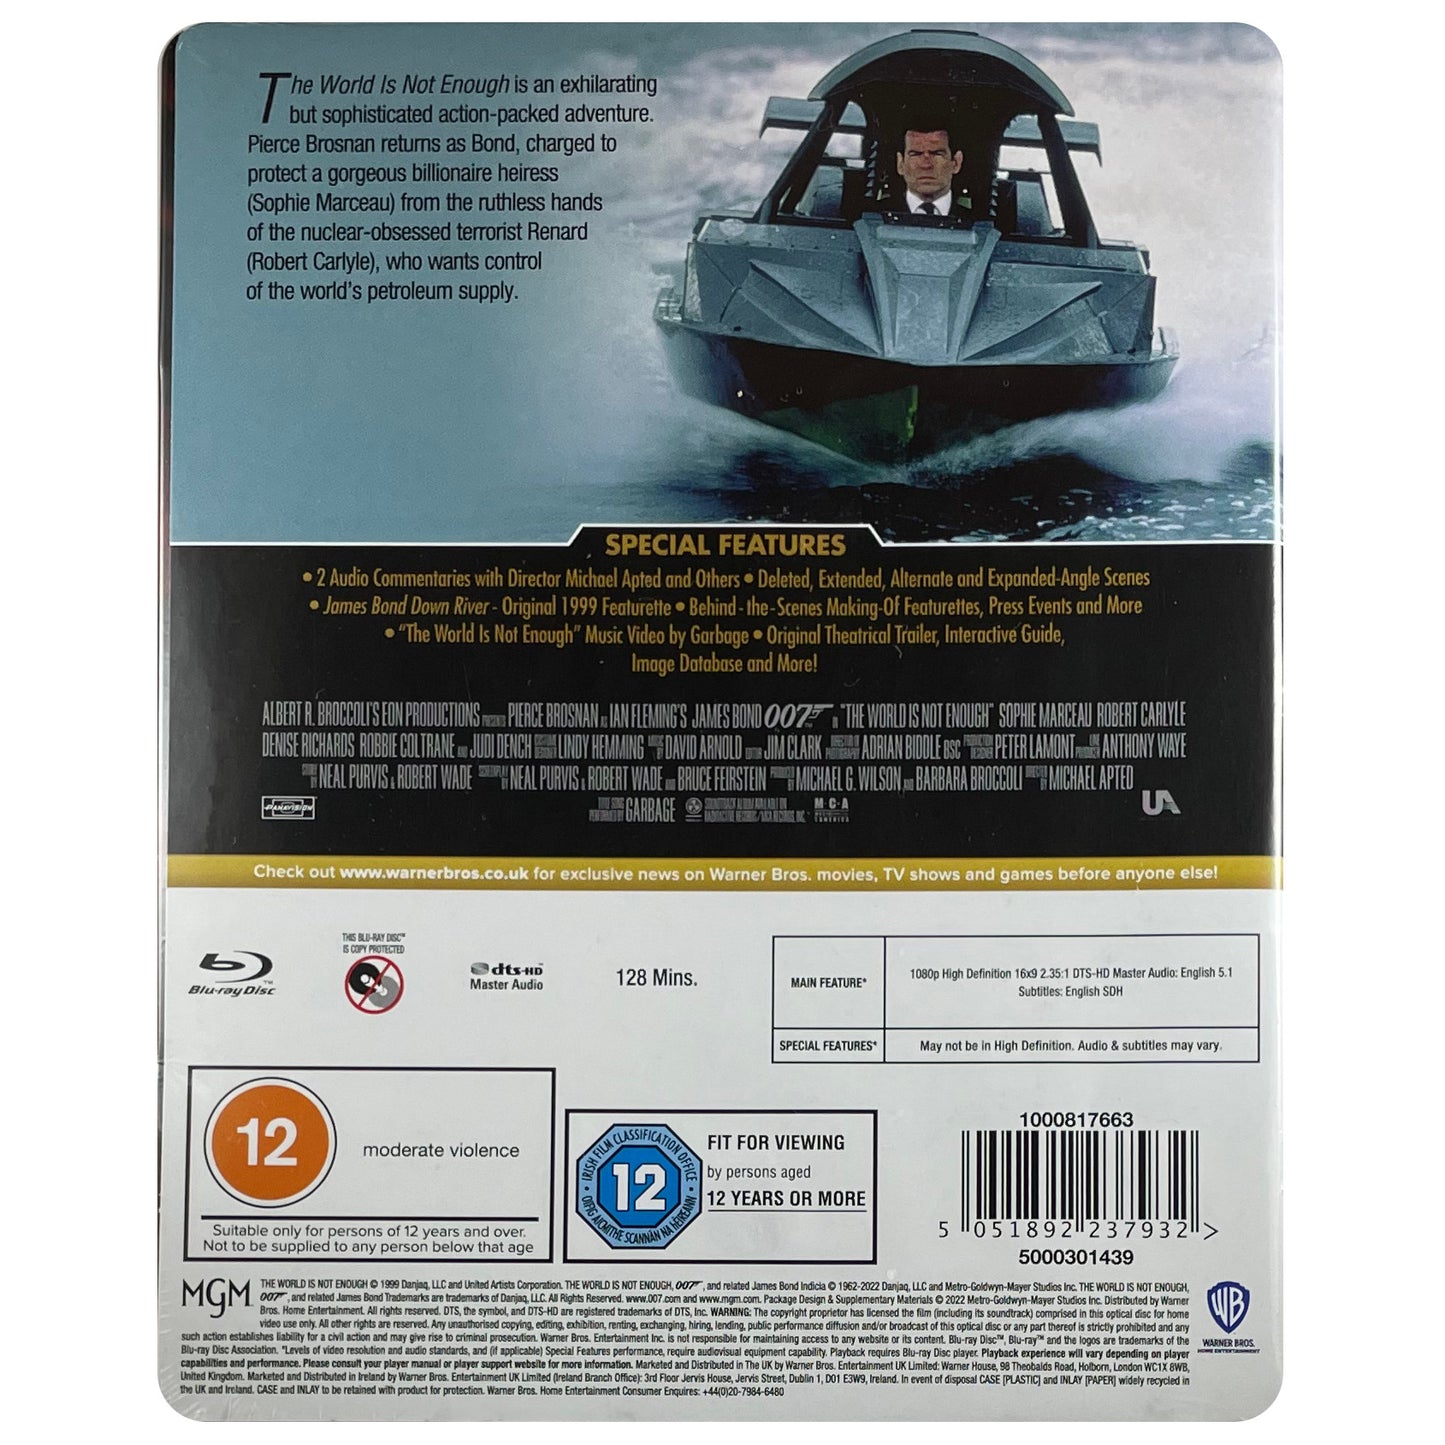 The World Is Not Enough Blu-Ray Steelbook